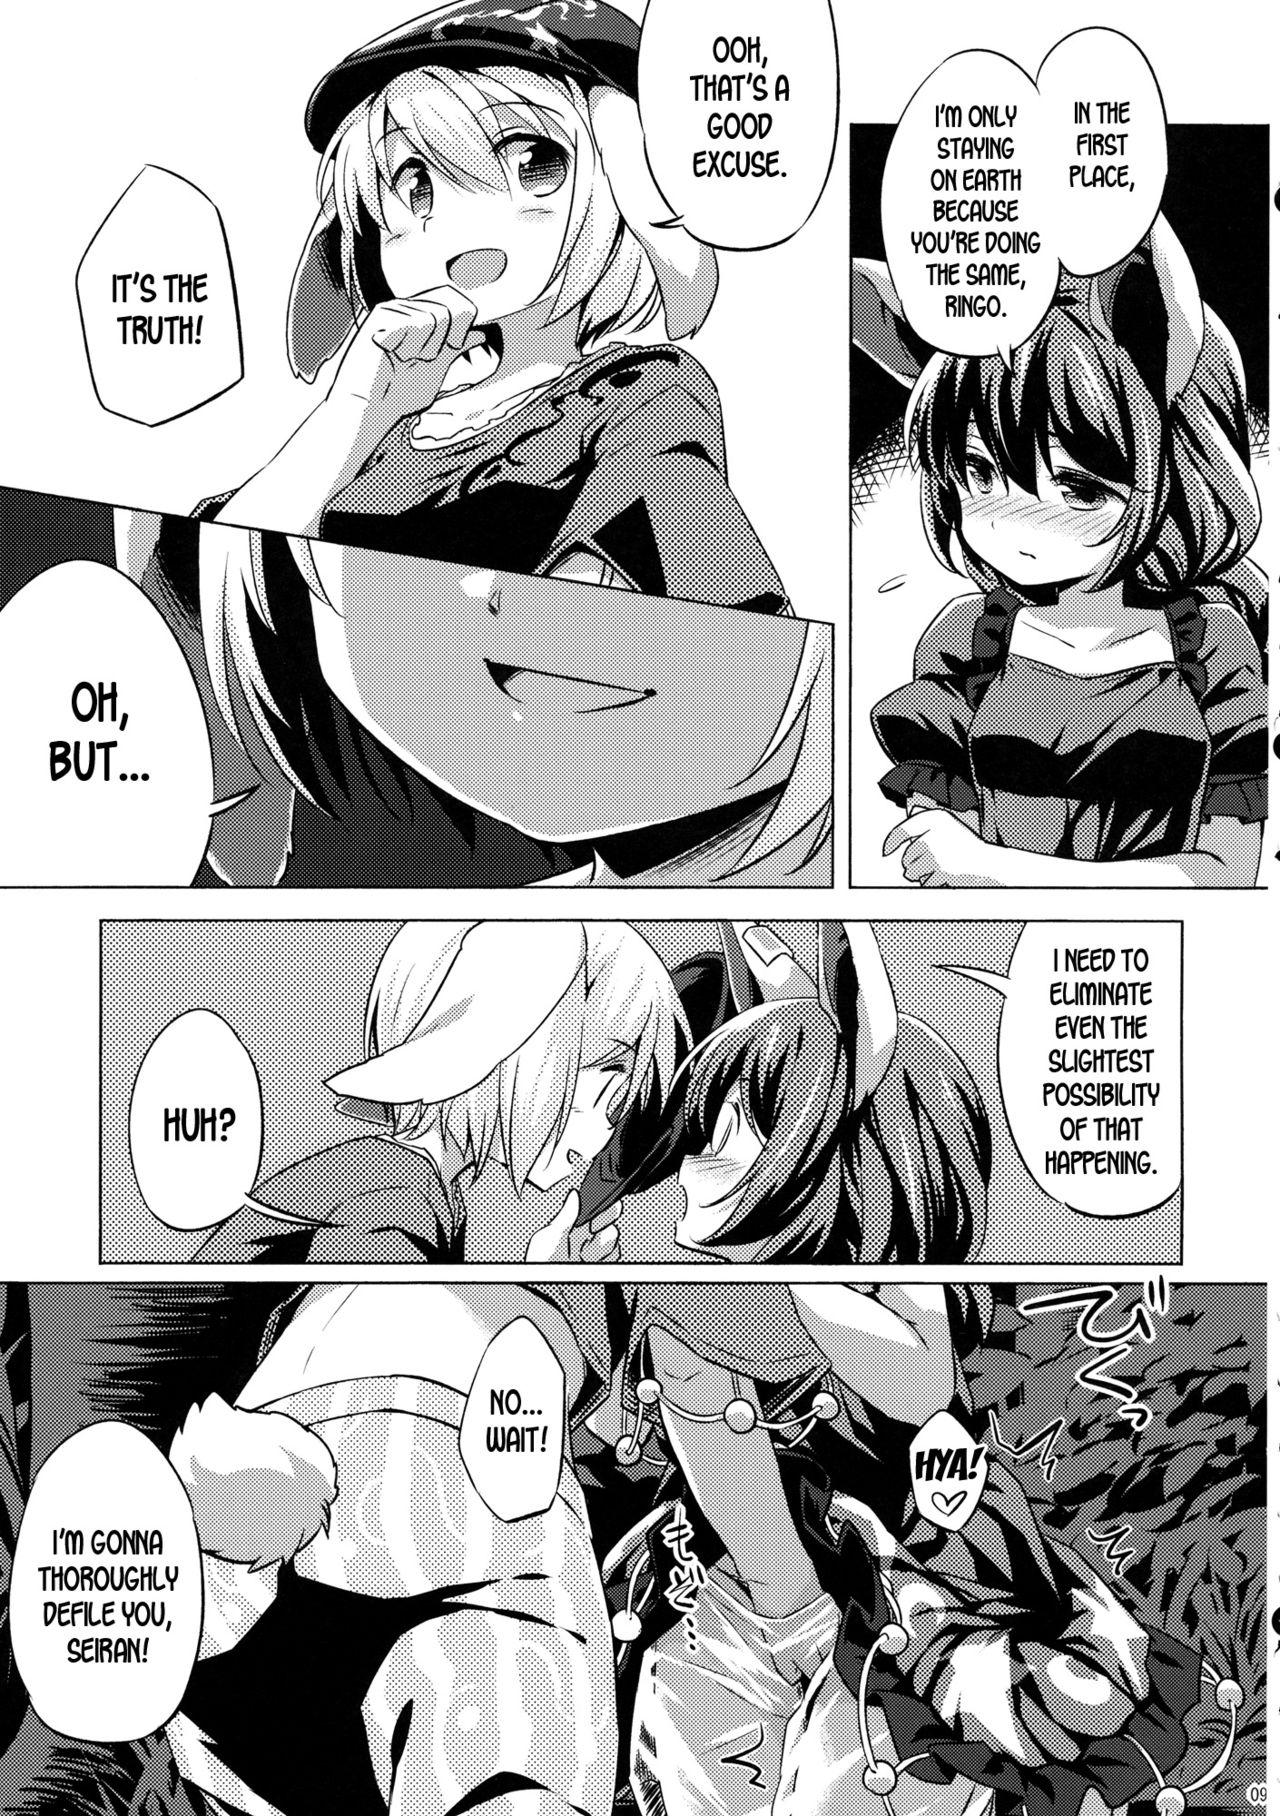 Caliente Speed Strike Seiran - Touhou project Free Amatuer Porn - Page 8